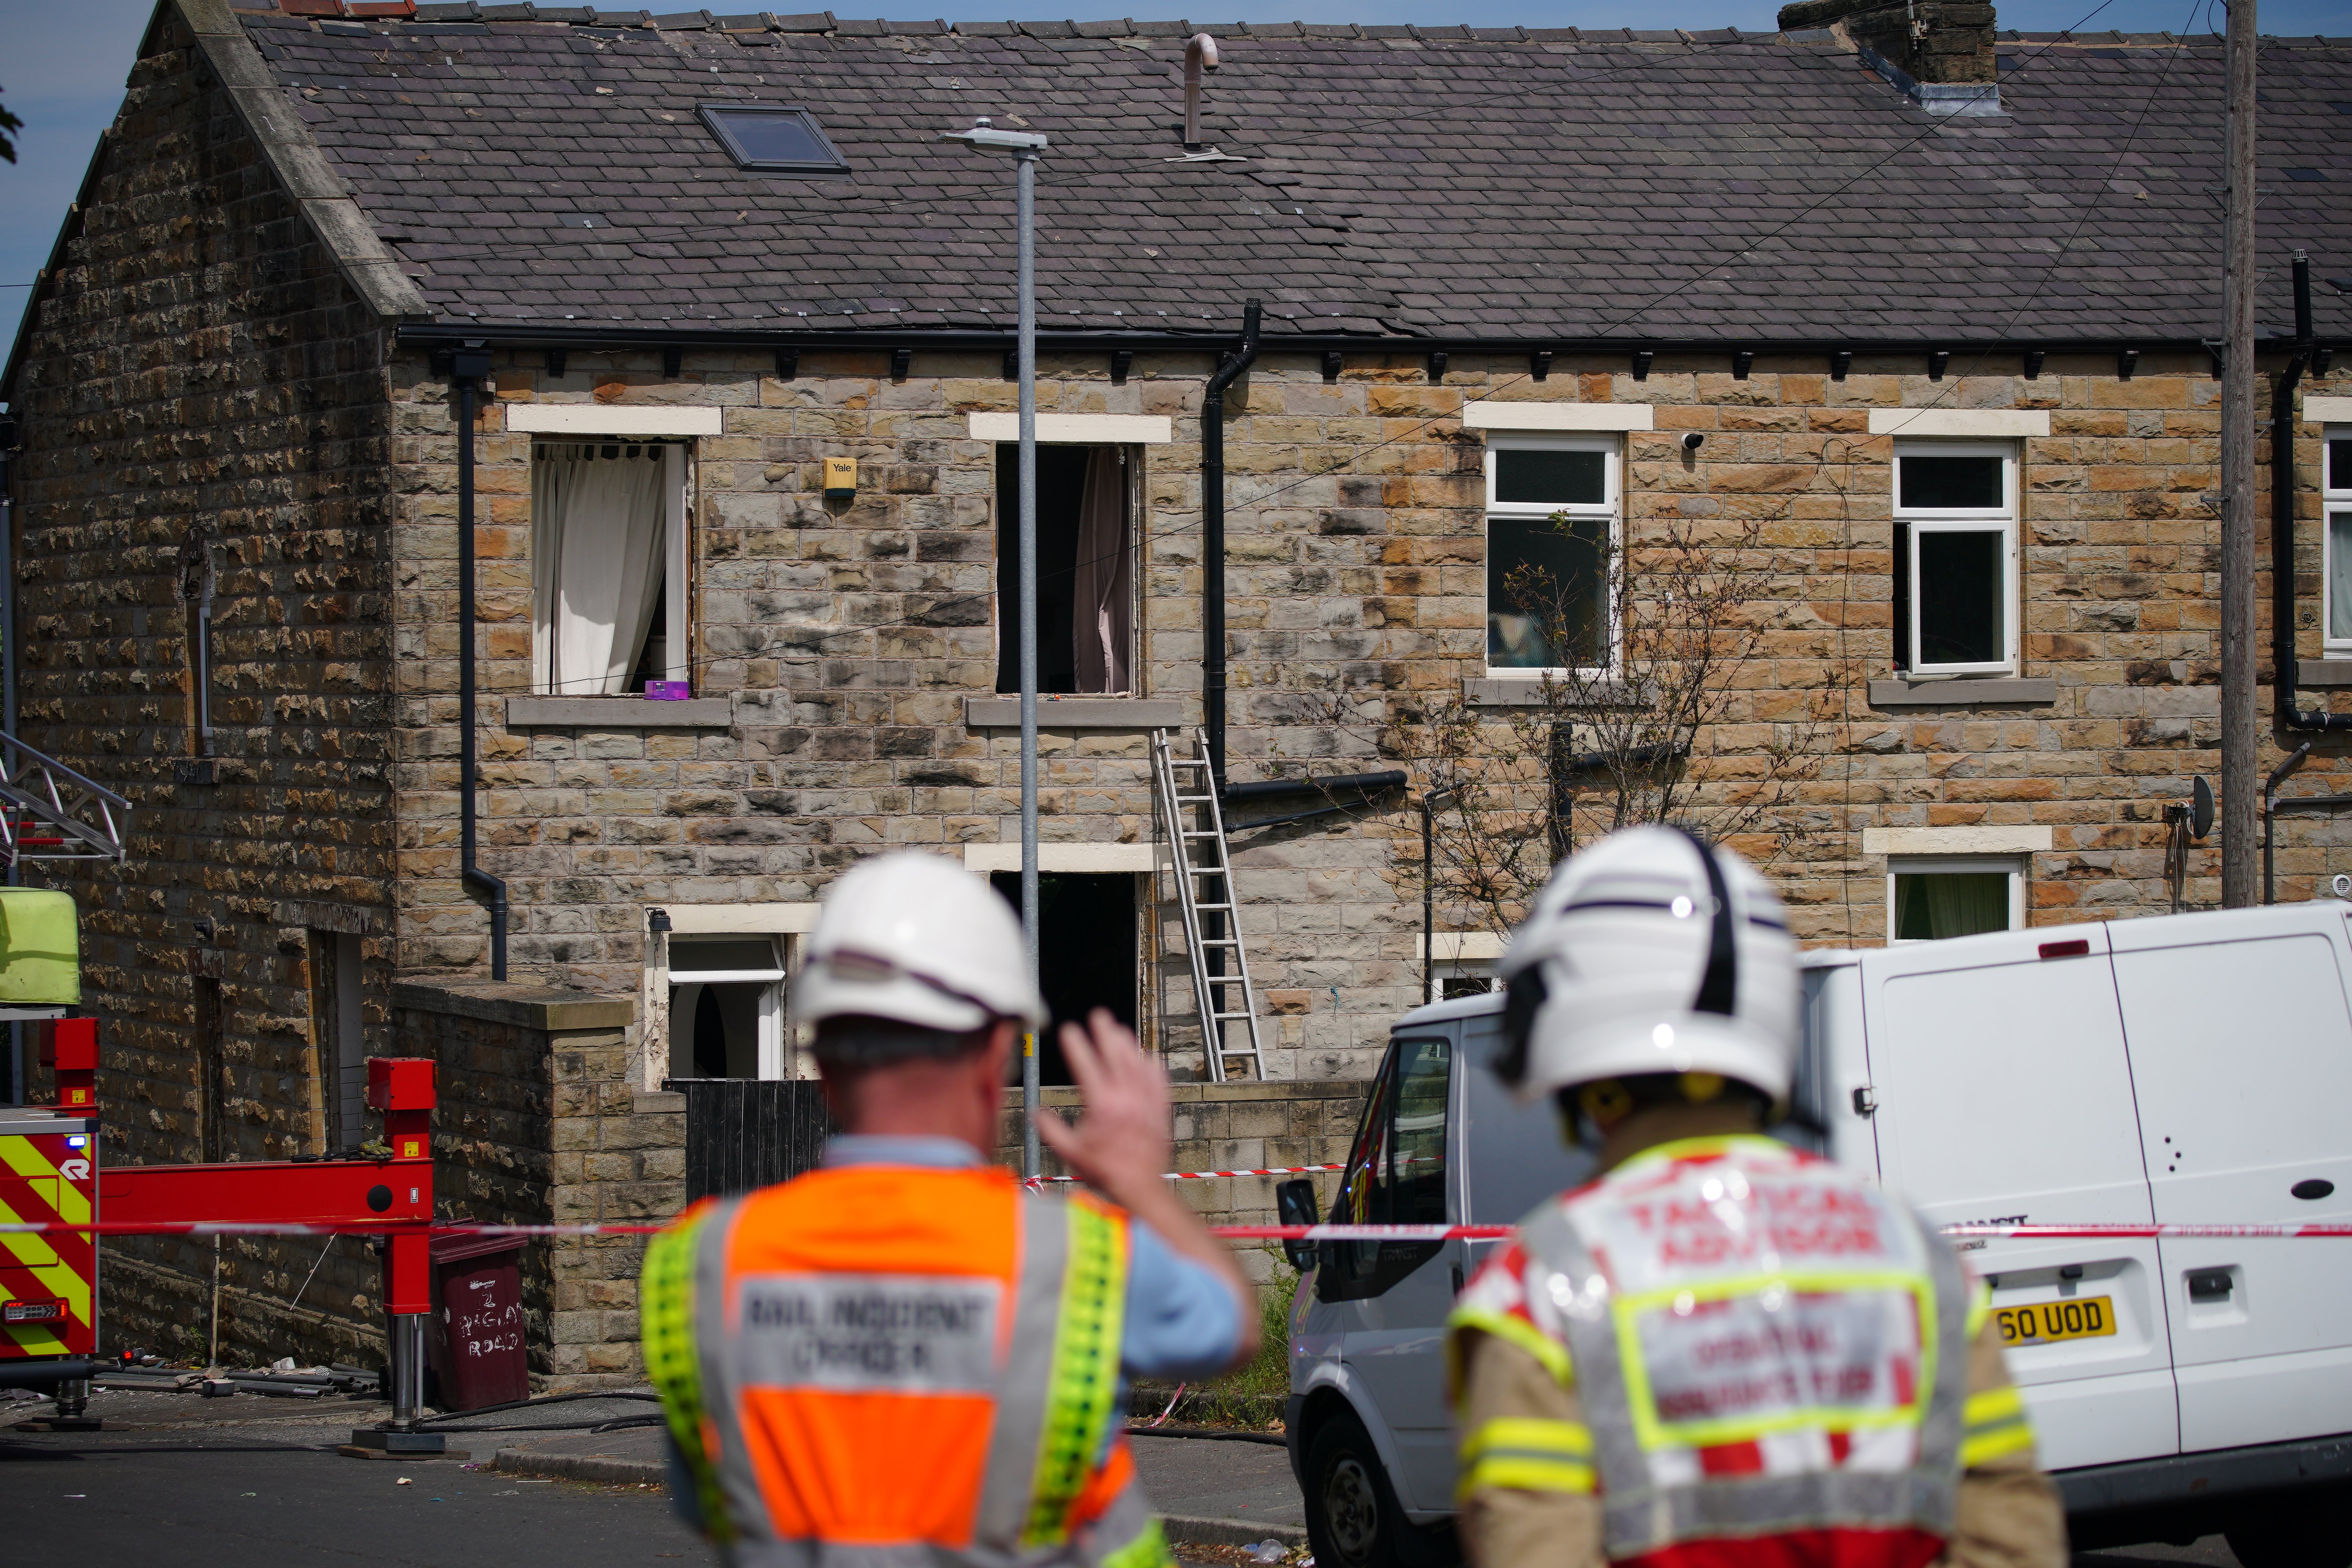 Emergency services at the scene following an explosion at a house in Burnley, Lancashire